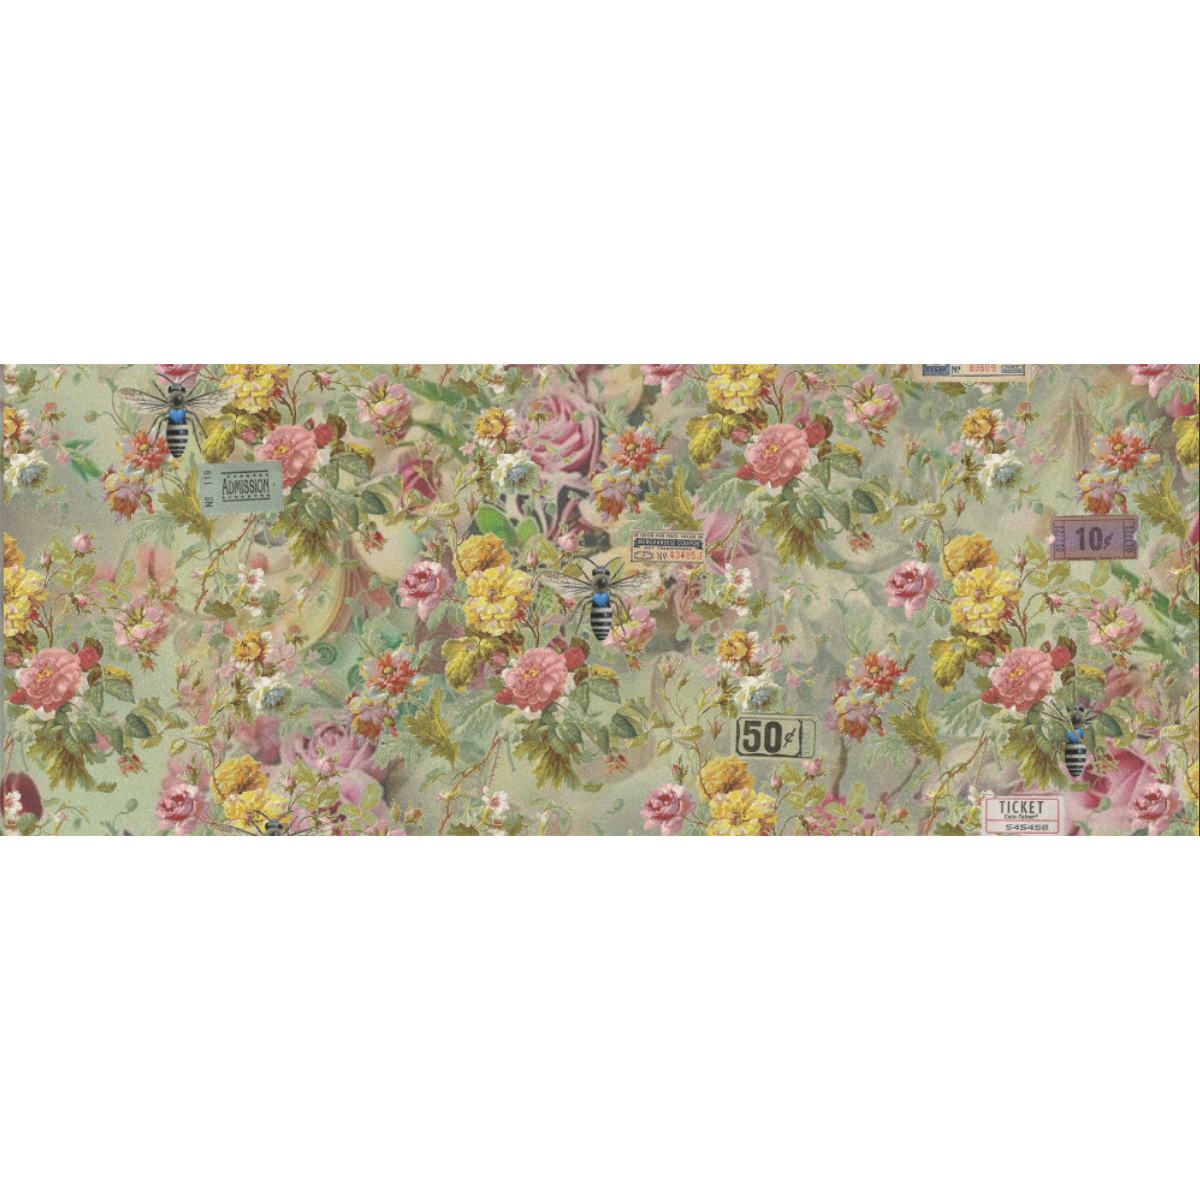 Flower Festival Gift Wrapping Paper 58"x 23" (5 Rolls)